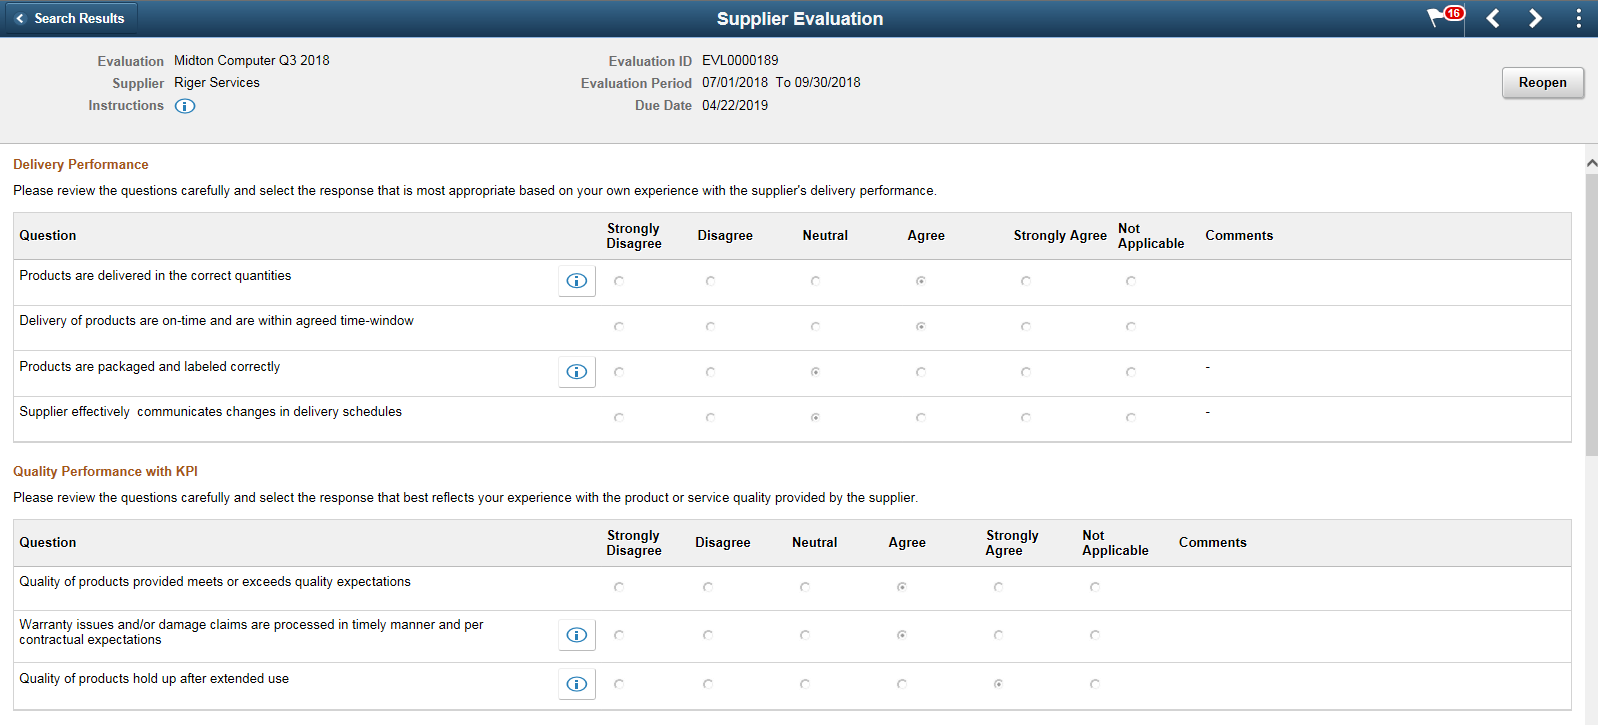 Reopen Supplier Evaluation page